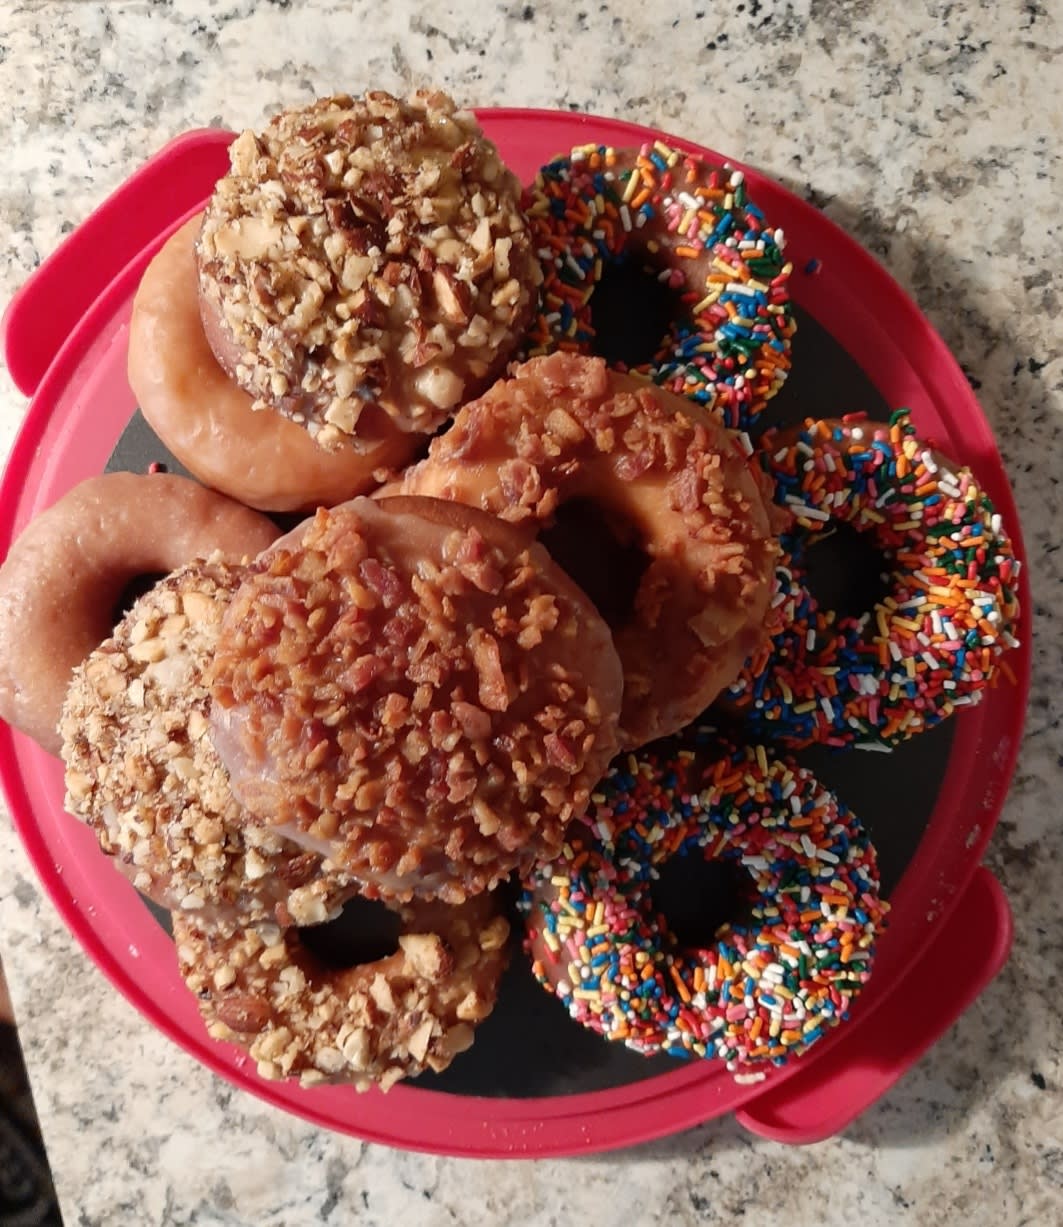 Homemade Donuts - Maple Bacon, Maple Glazed, Sprinkles, Mixed Nuts and Glaze. Some with Lemon Curd filling.